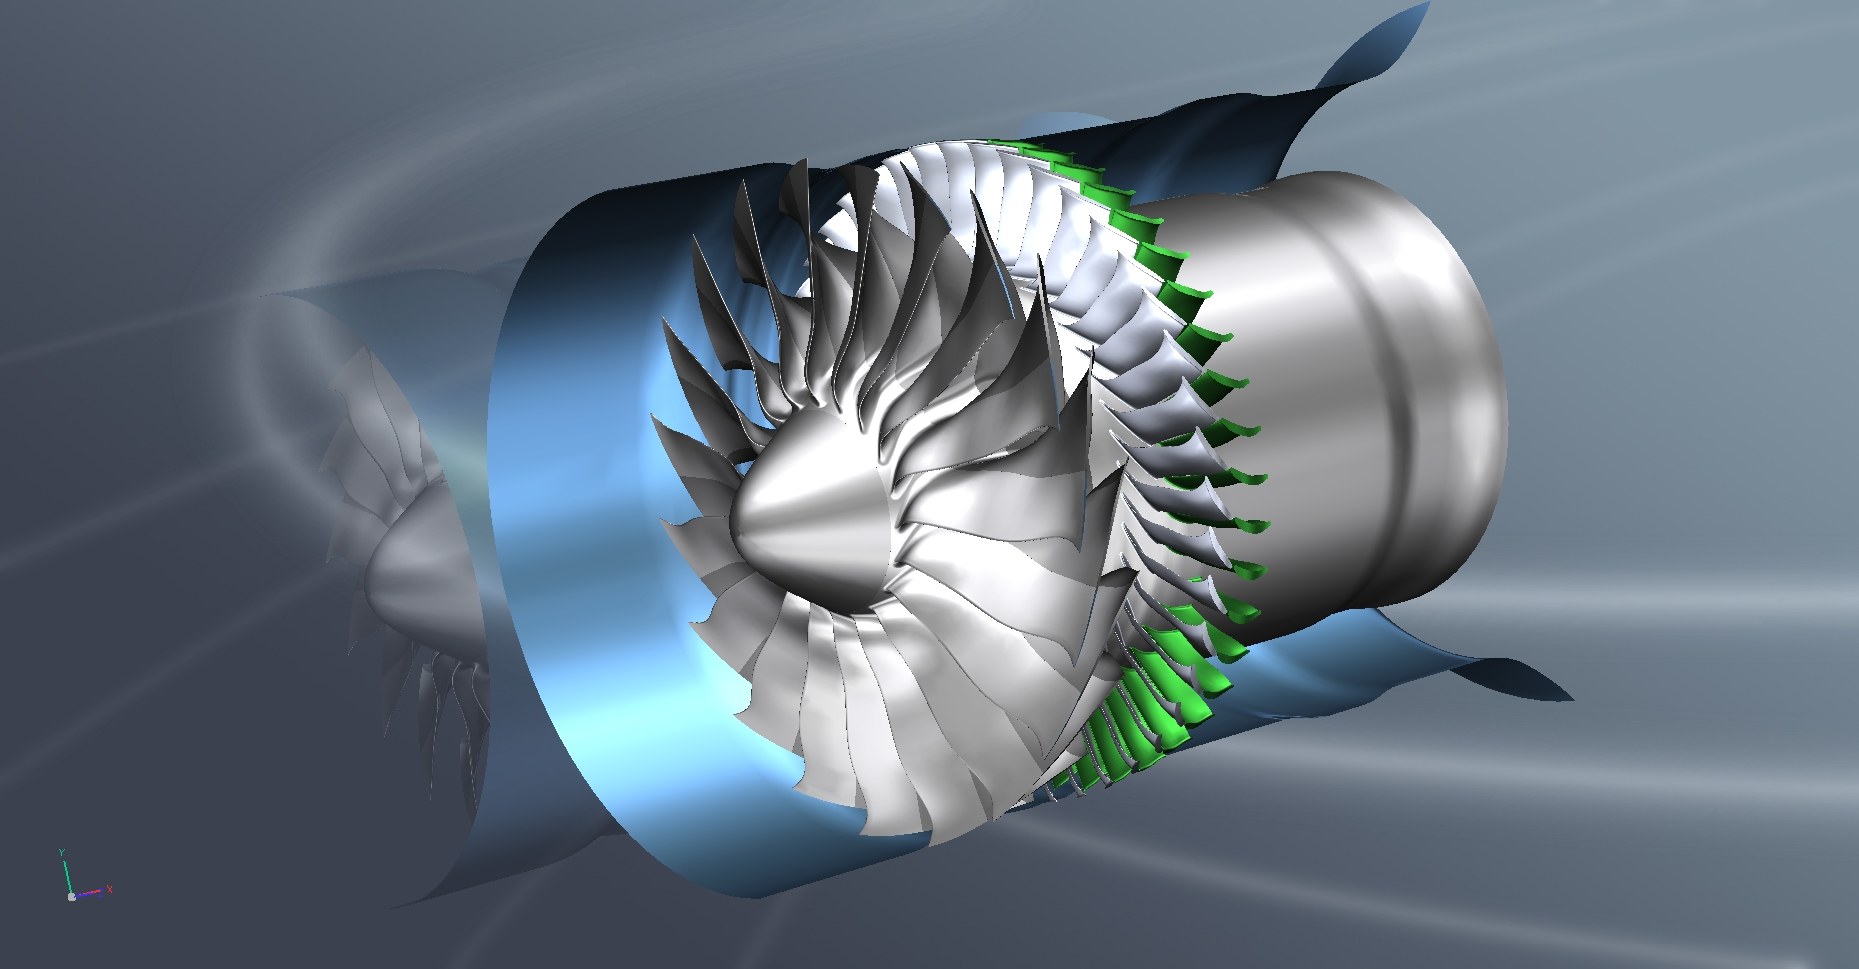 CAD model of an engine structure